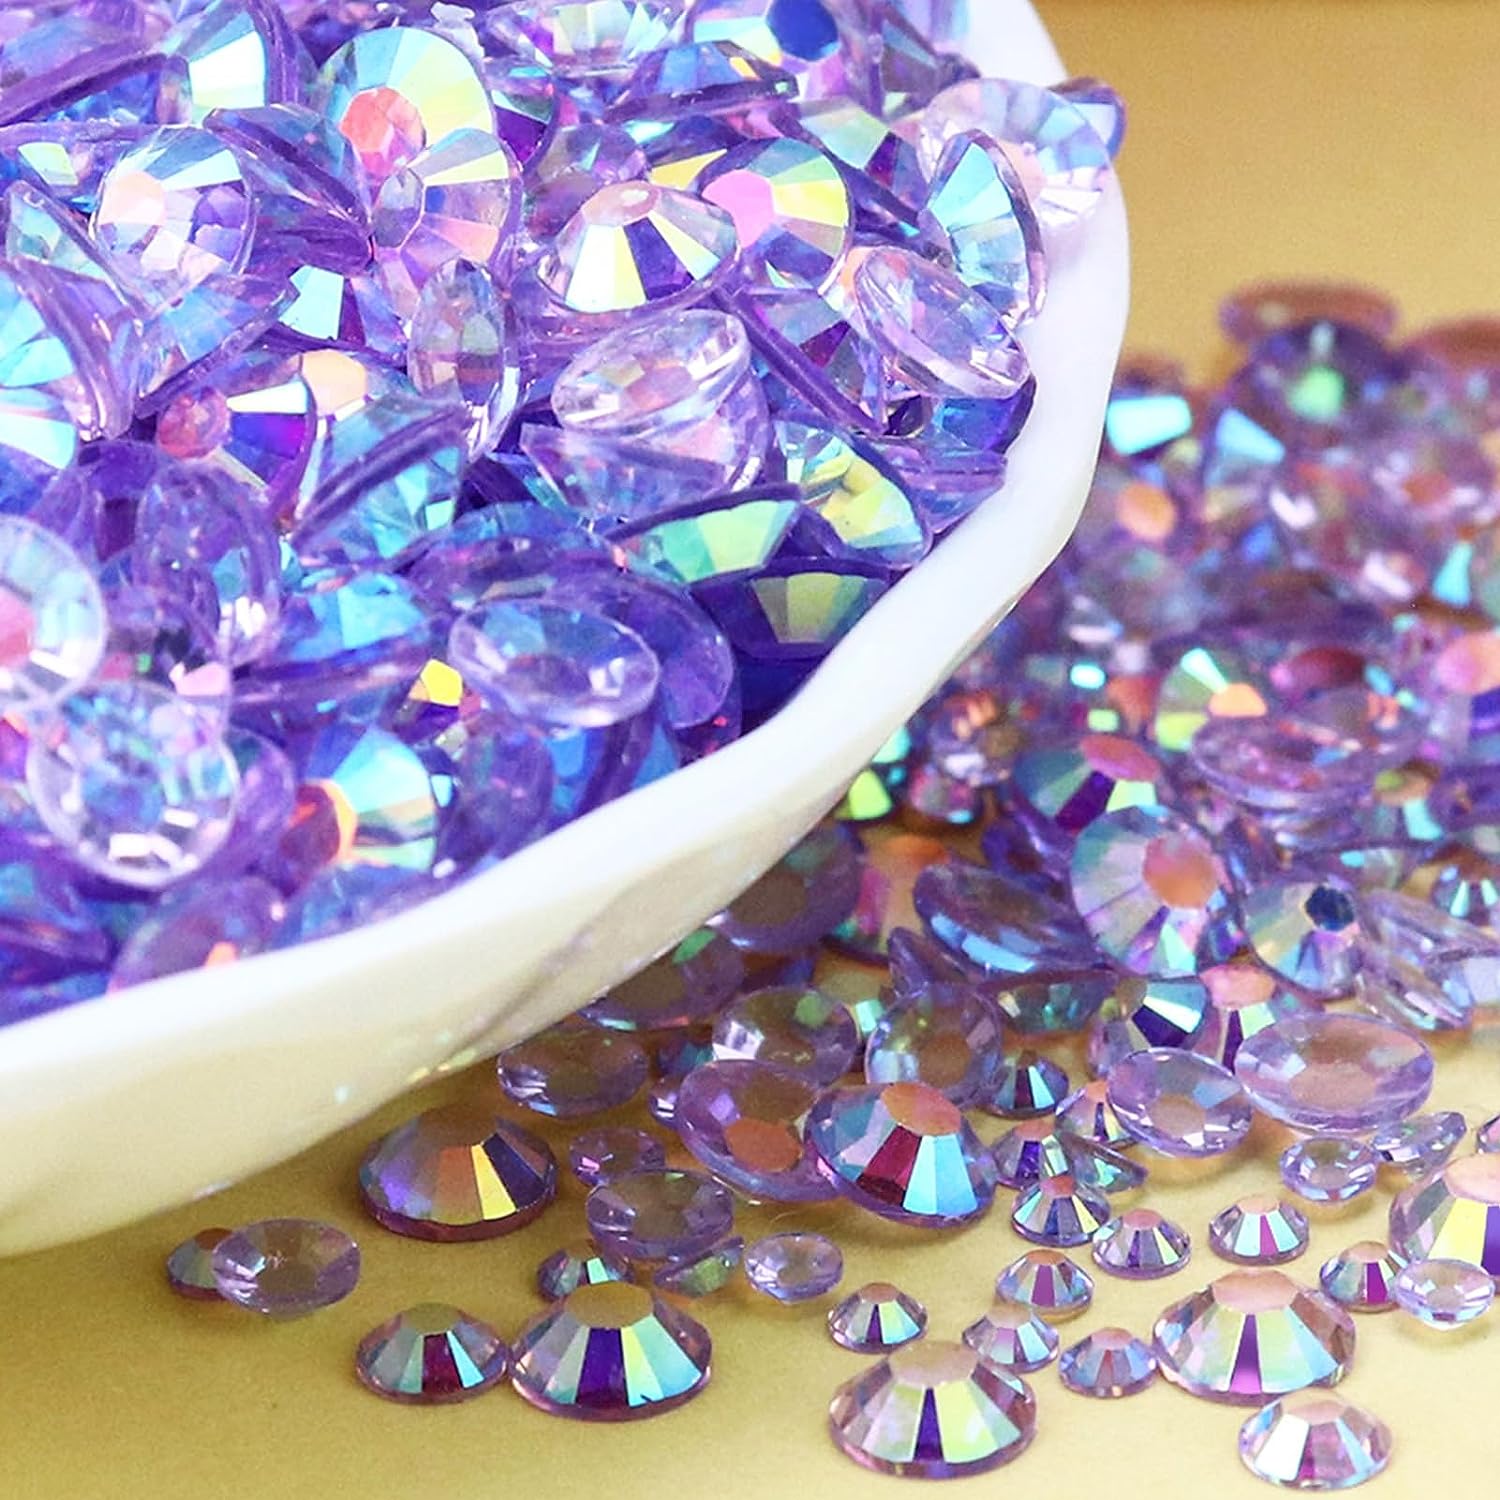  RODAKY 6000Pcs Resin Flatback Rhinestones for Crafts,2-6MM  Purple Violet Round Crystal Rhinestones for Nails Face Gems Jewelry Making  Glitter Diamond for Nails Design DIY Makeup Tumblers Clothes